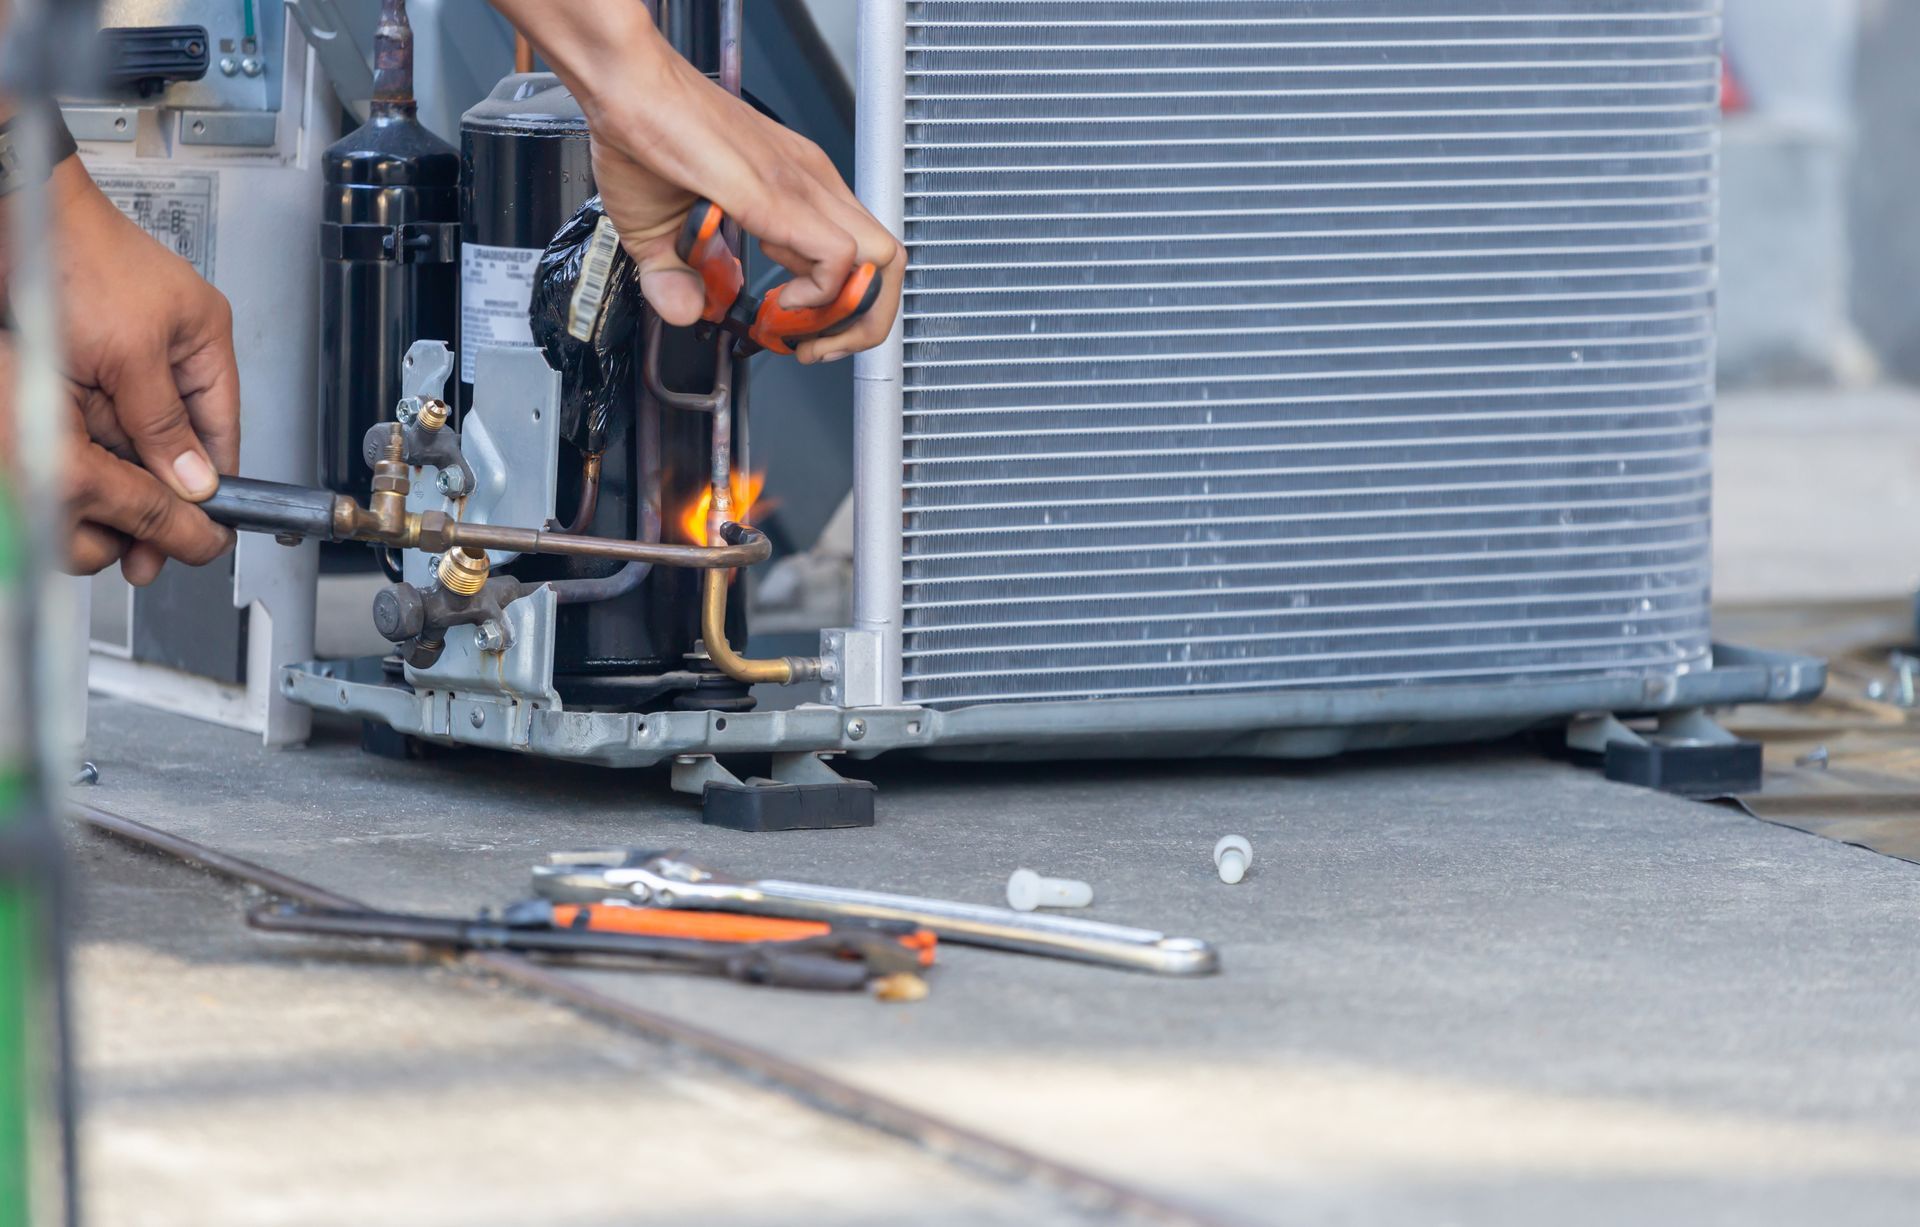 Close-up of an Air Conditioning Repair team utilizing fuel gases and oxygen for metal welding or cutting.